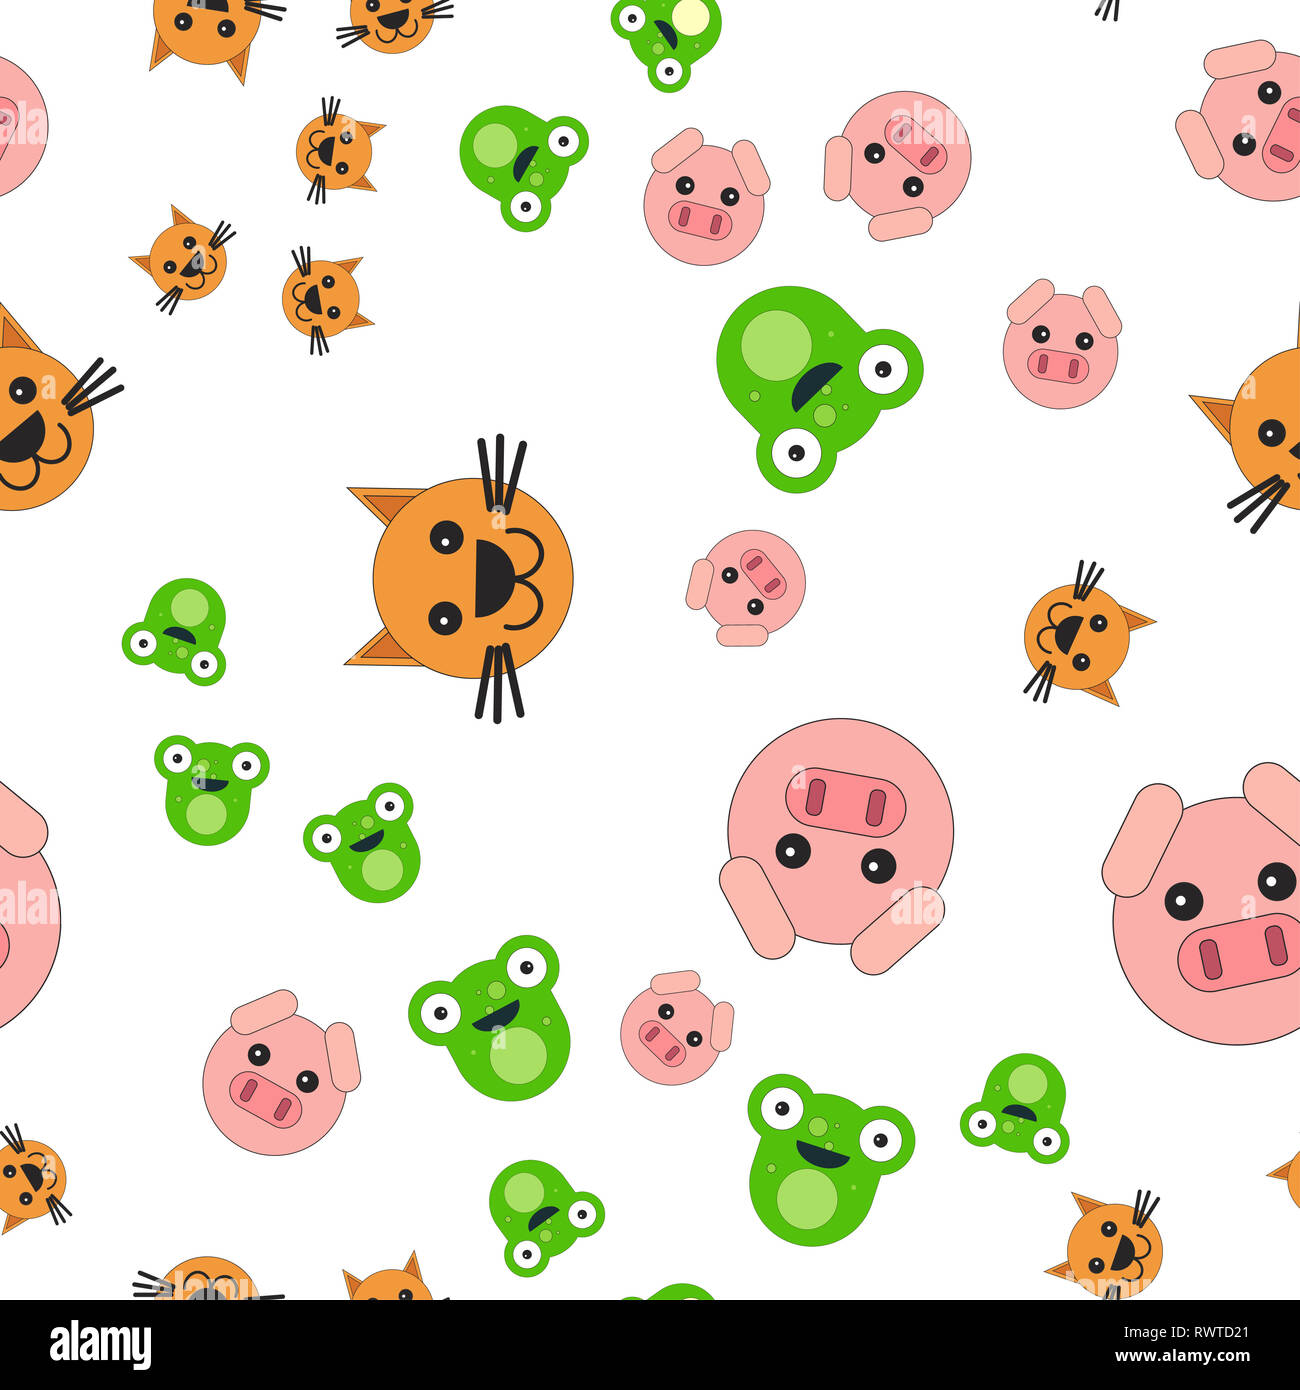 Seamless pattern of the head of a cat frog and pig.  illustration in cartoon style. Stock Photo